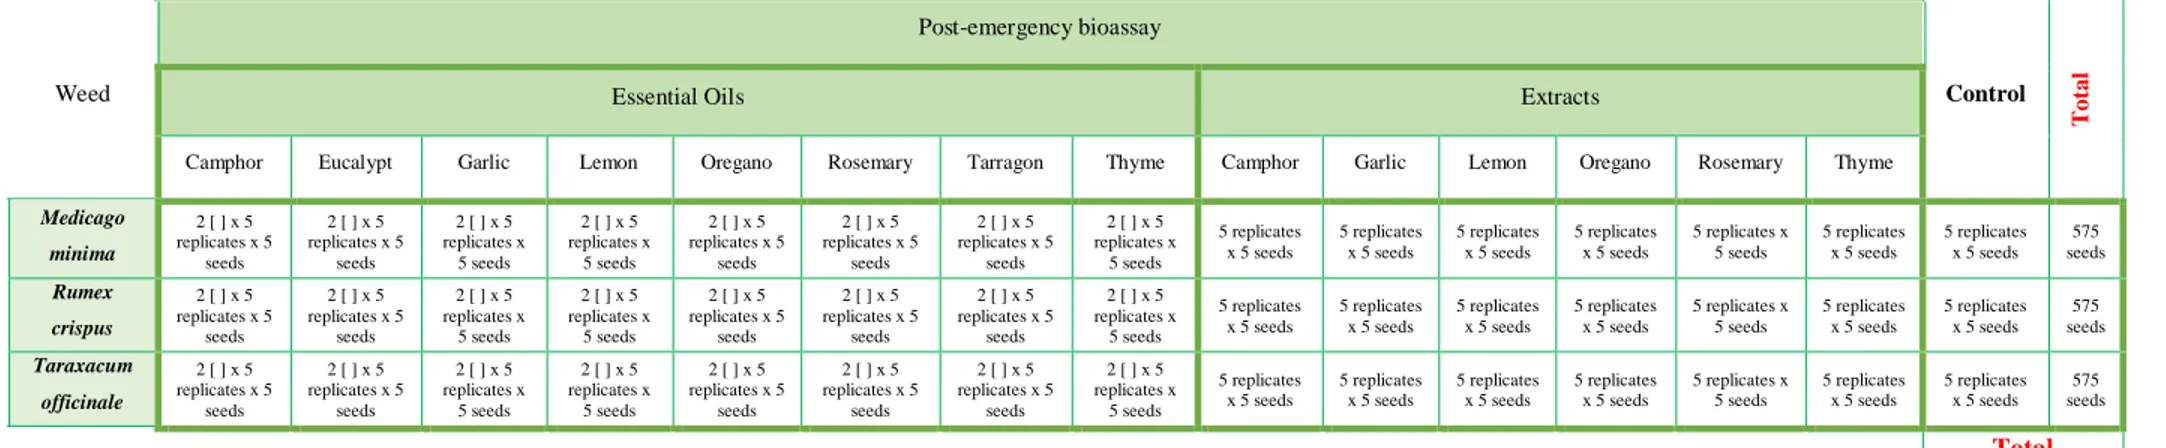 Table 5  Description of post-emergency bioassay and seed species used. Essential oils, aqueous extracts trials and controls with number of replicates, seeds and Petri dishes  used  